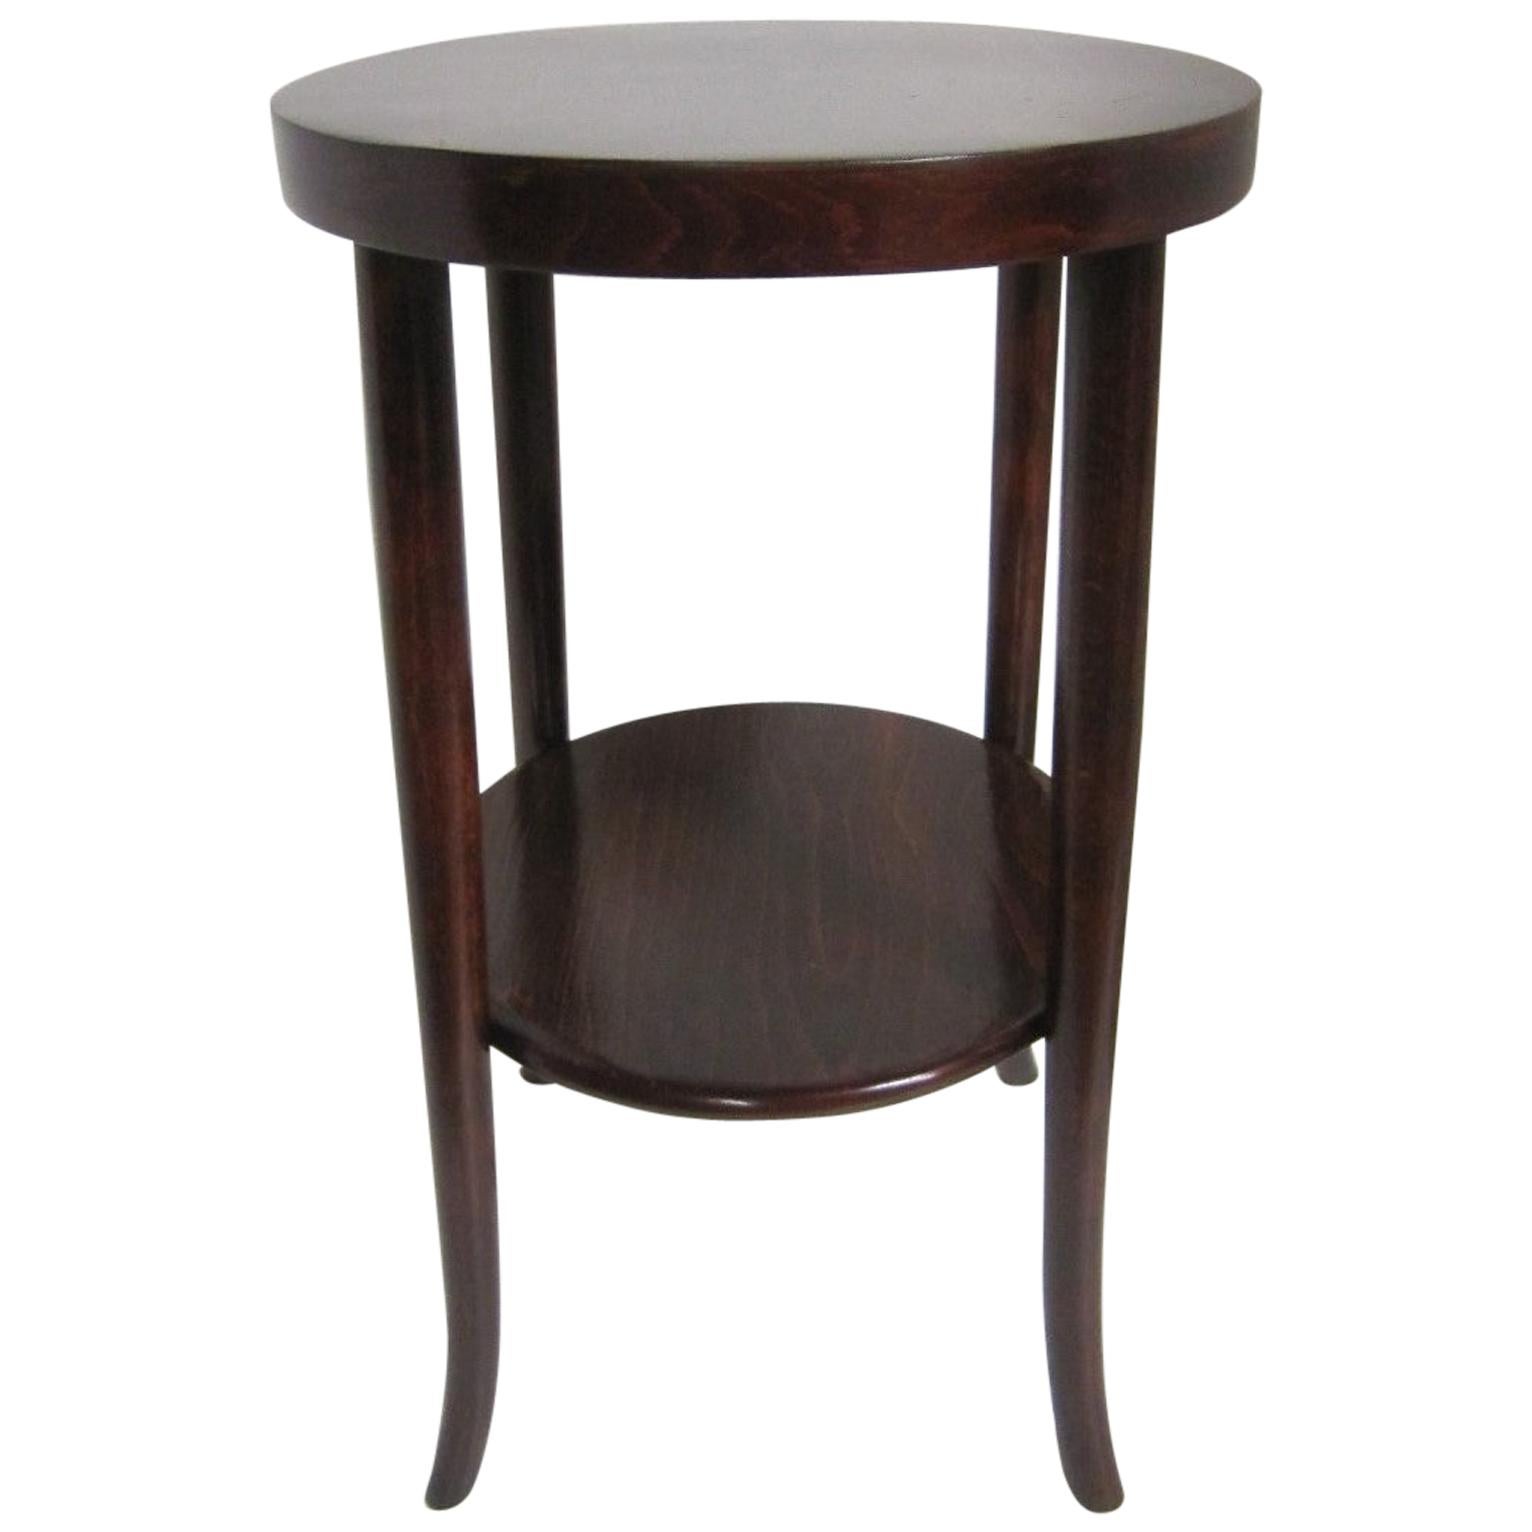 Original Austrian Small Round Bentwood Jungenstil Side Table with Oxblood Finish